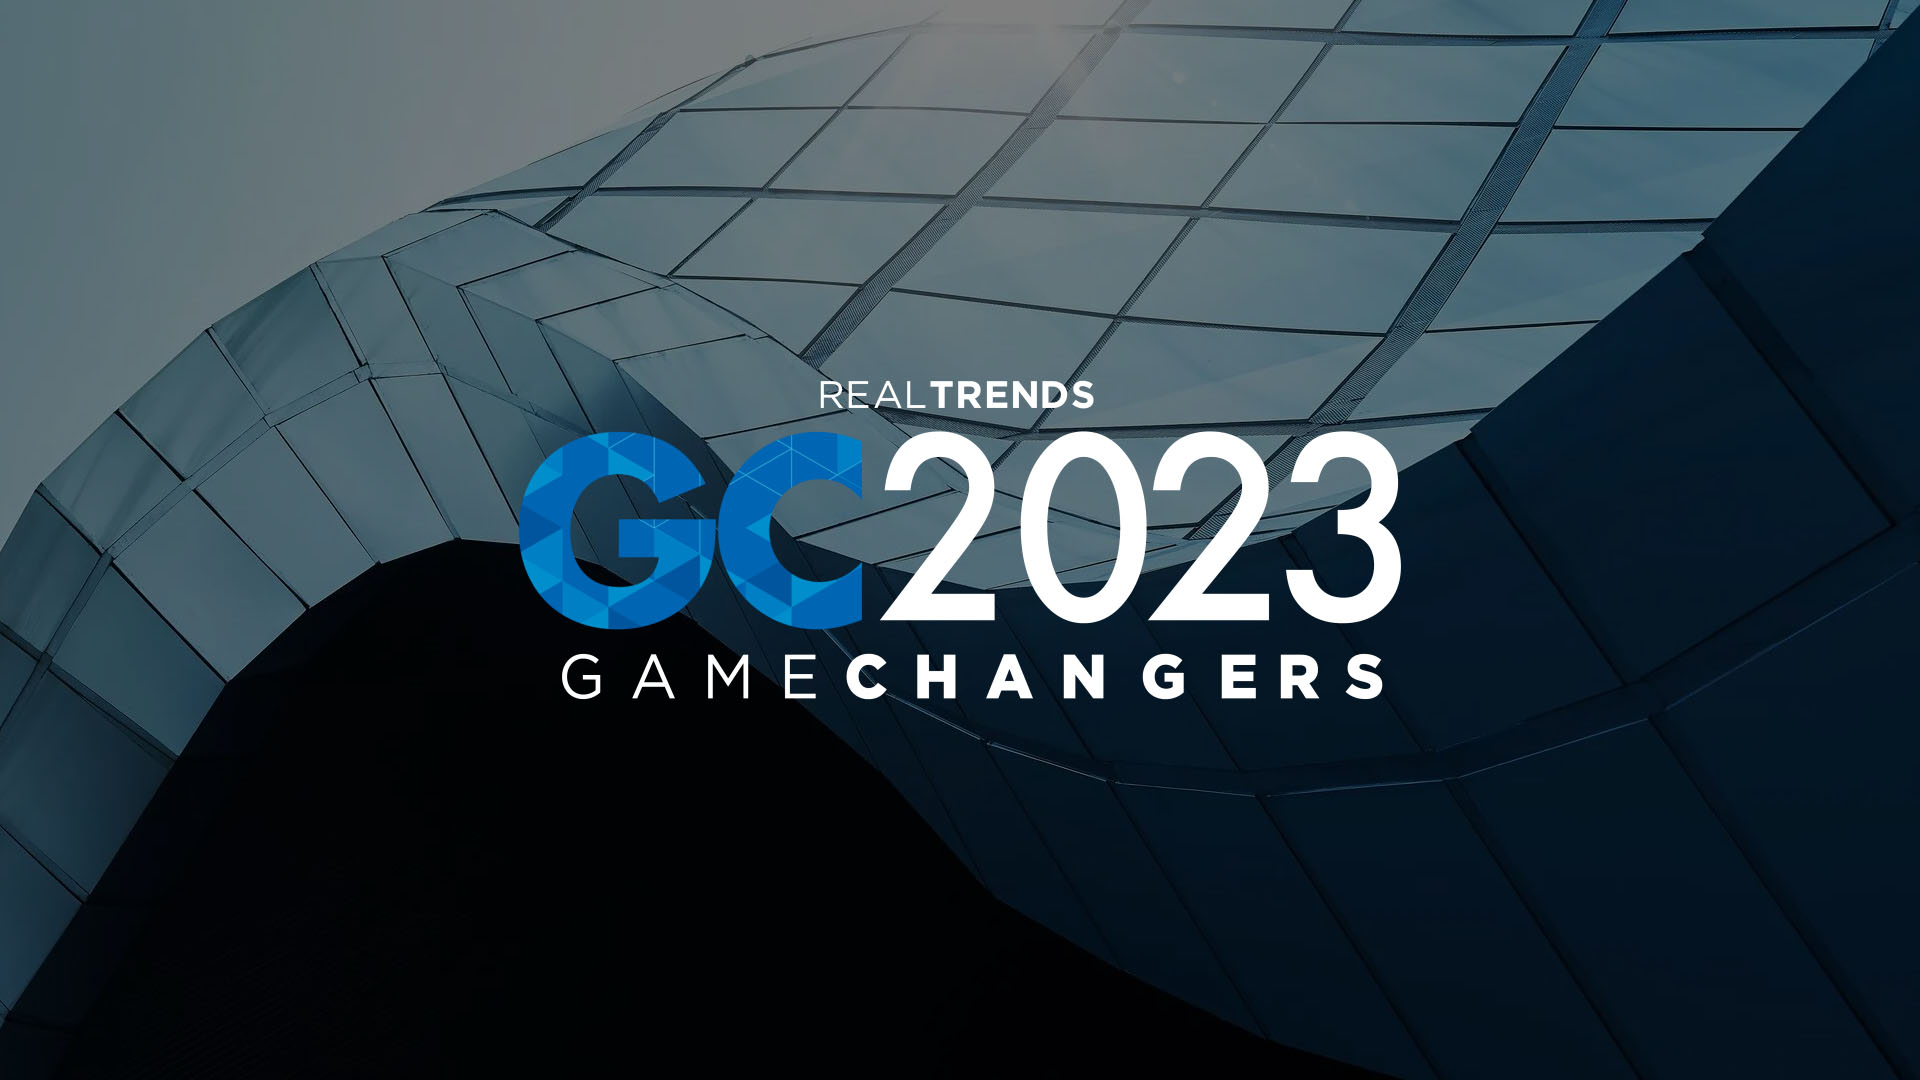 Featured image for “Fathom Holdings Named as a RealTrends 2023 GameChanger”